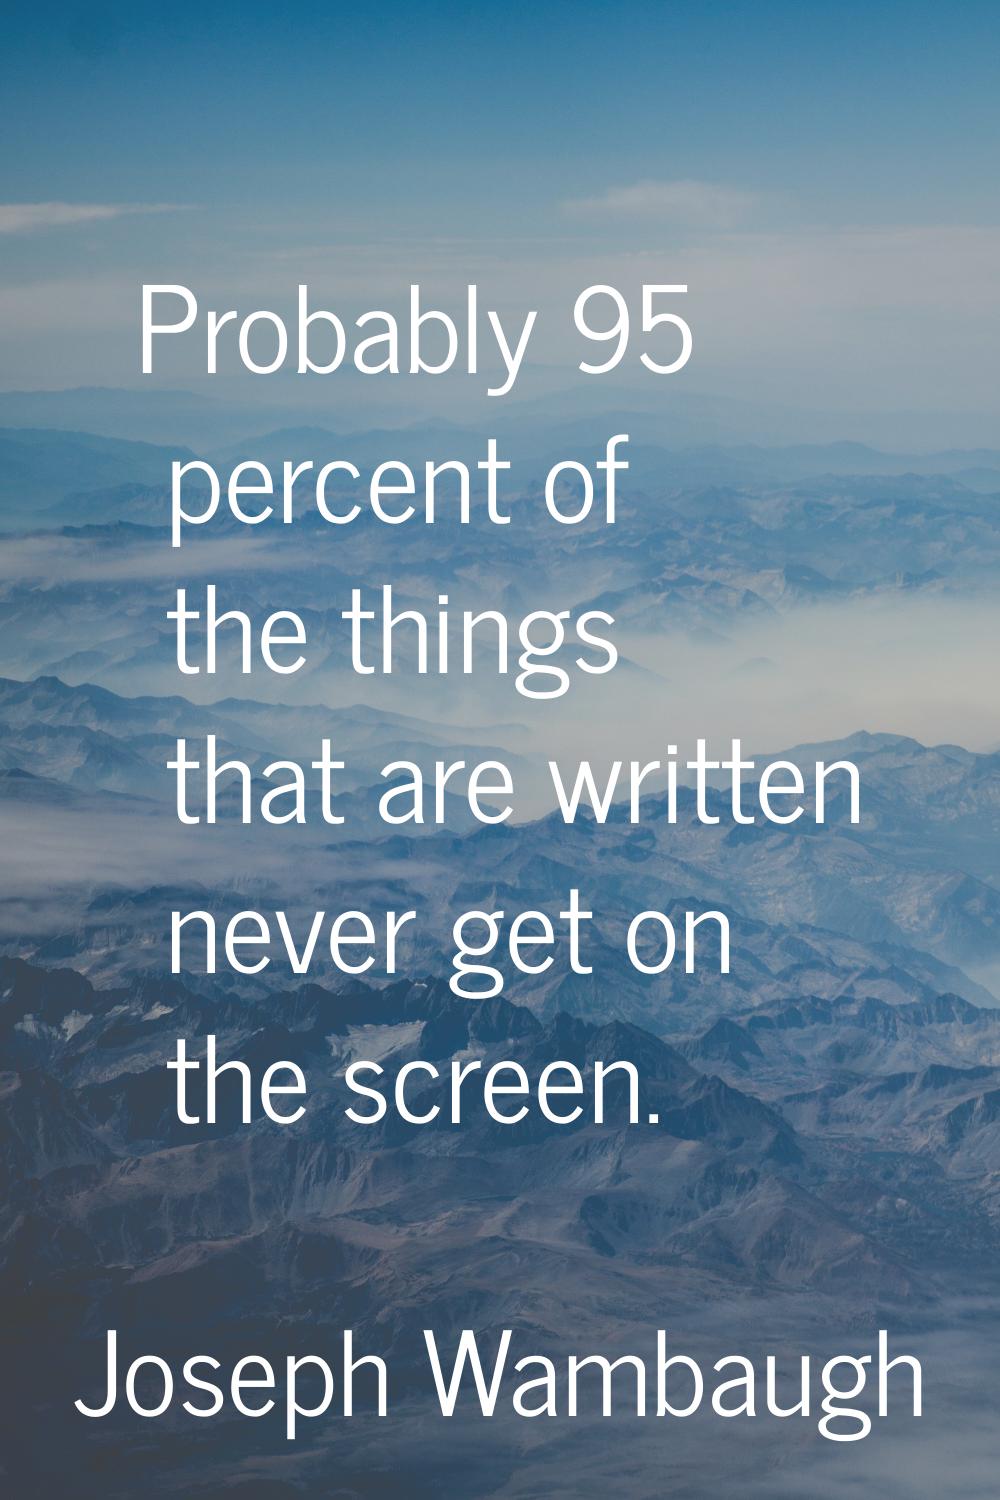 Probably 95 percent of the things that are written never get on the screen.